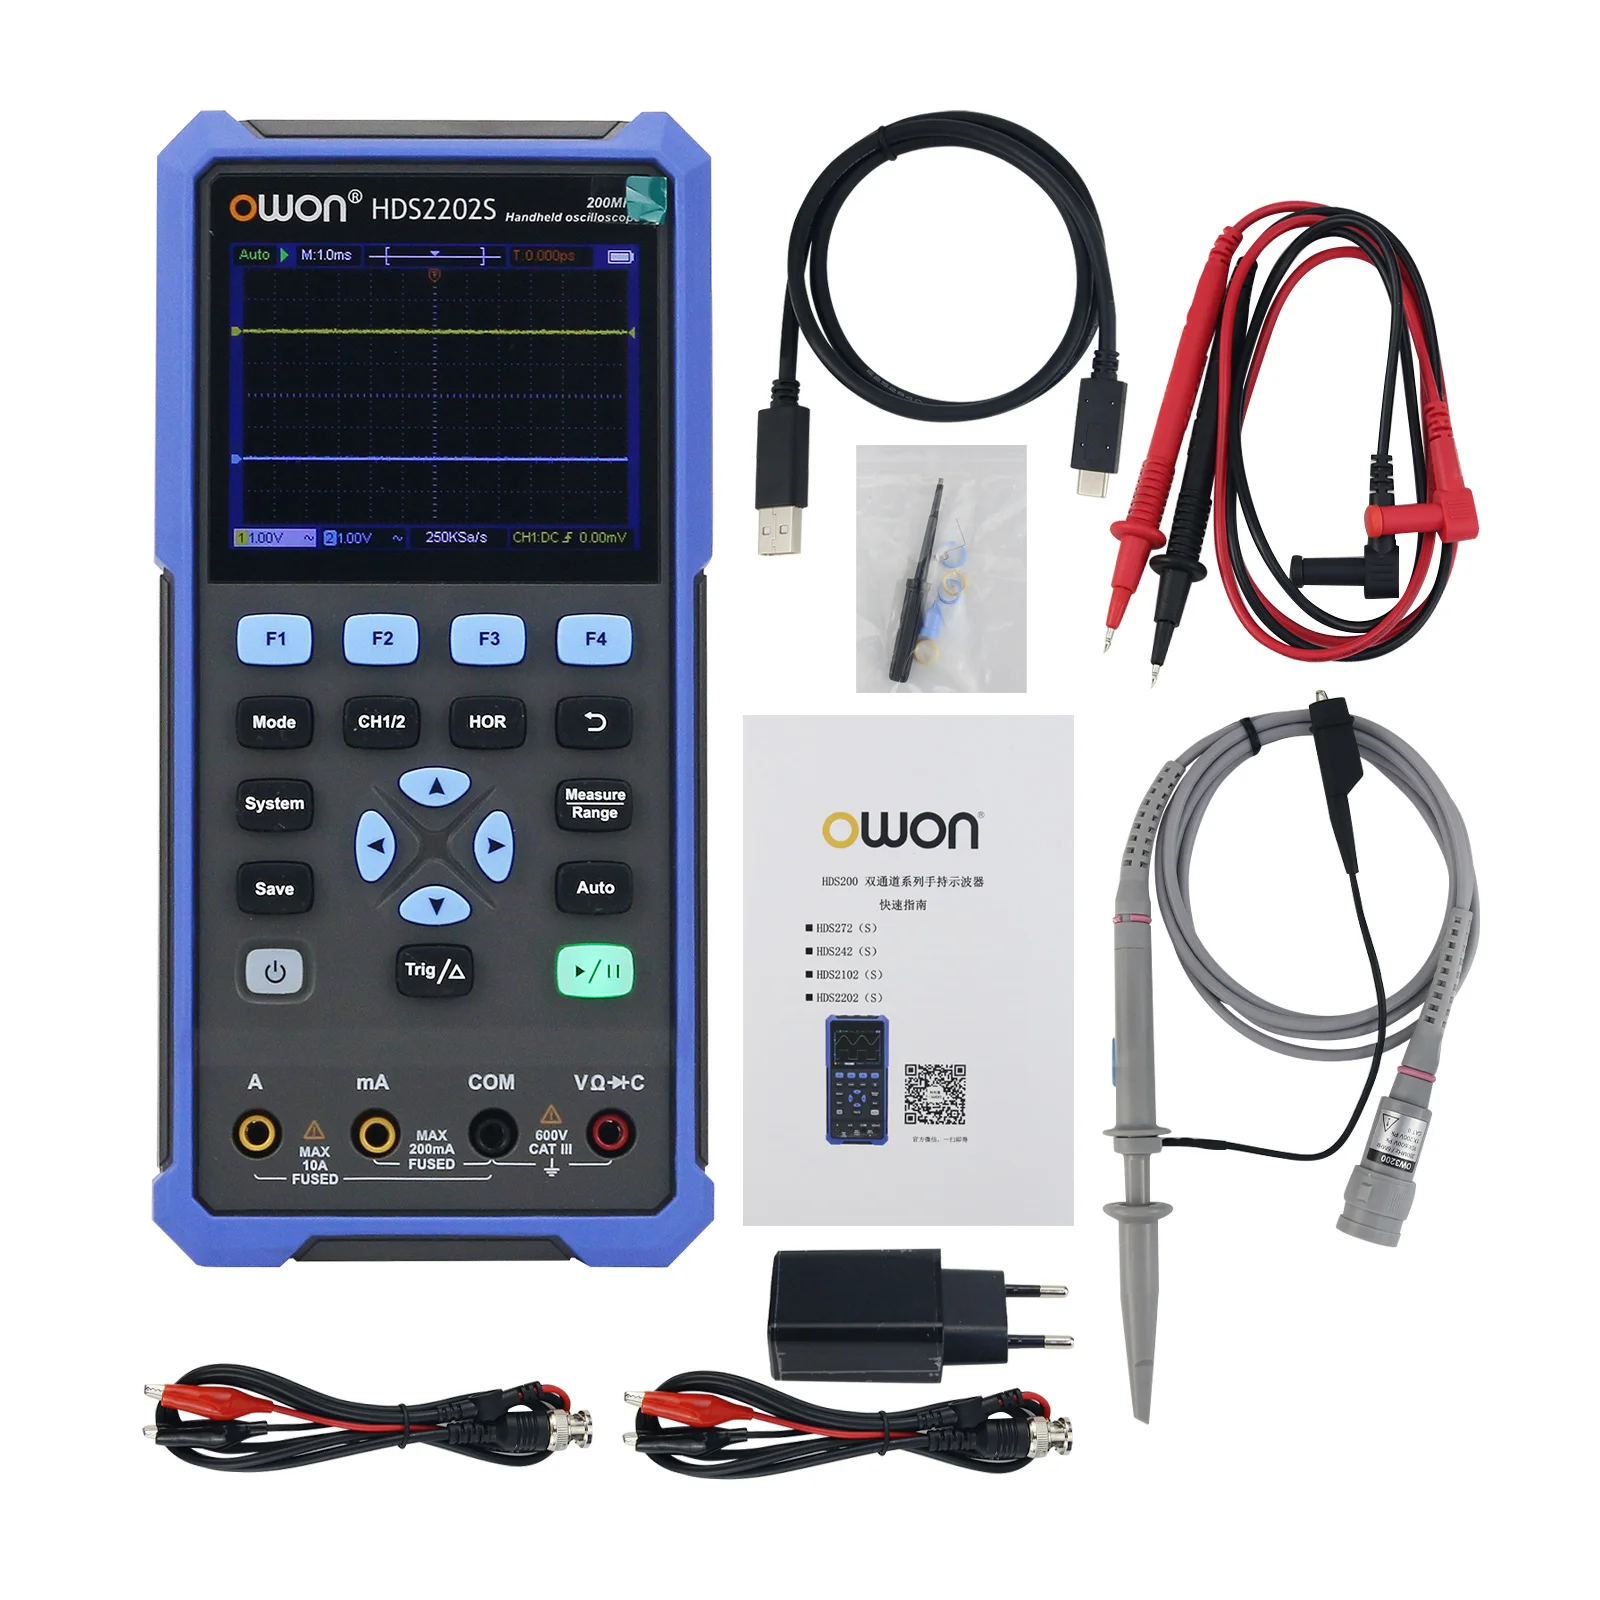 

HDS2202/HDS2202S Two Channel Digital Oscilloscope for OWON HDS200 Series High Performance Handled Digital Oscilloscope